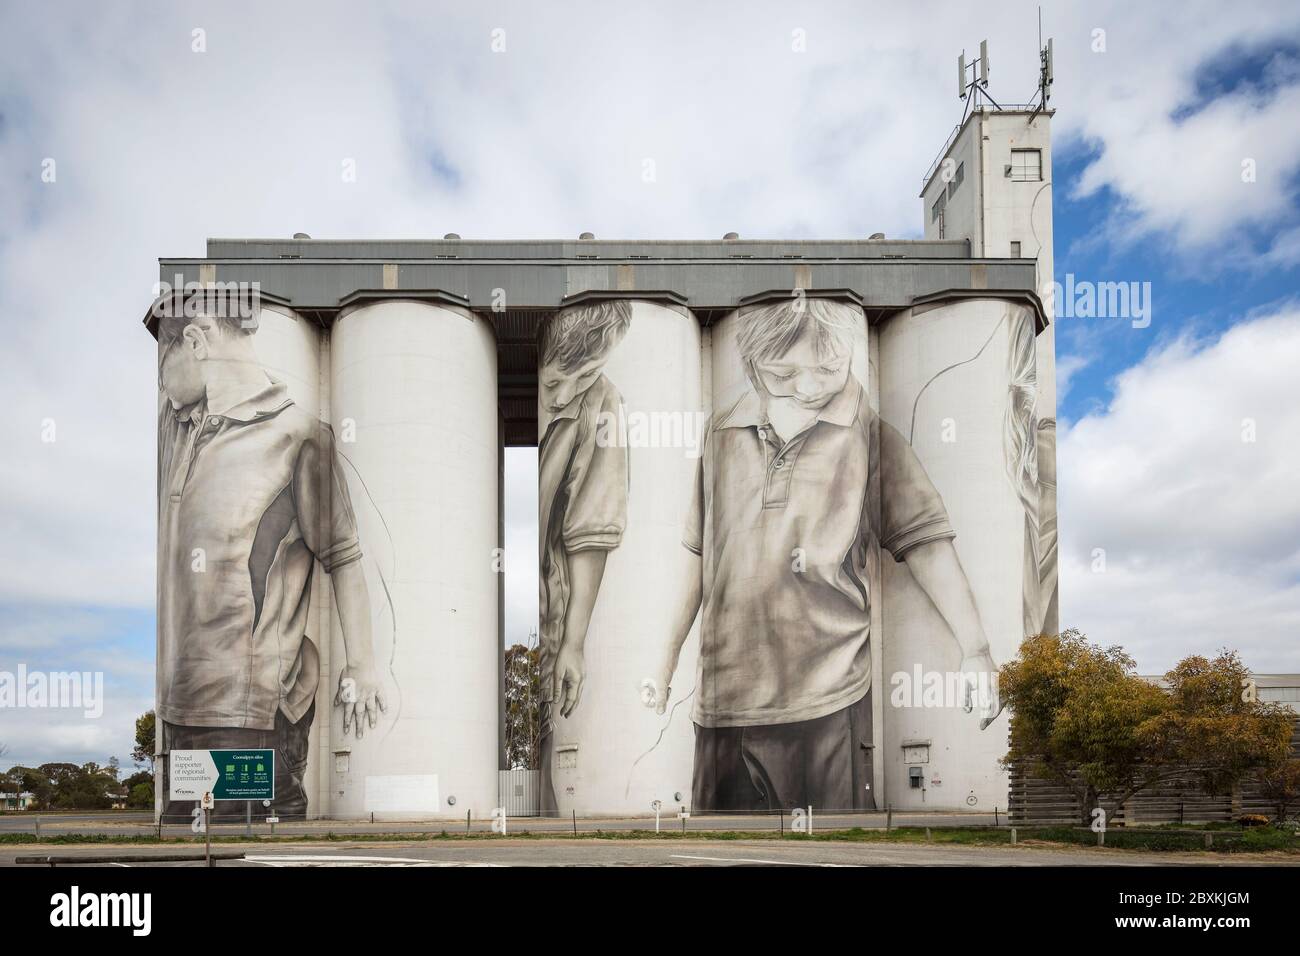 Coonalpyn South Australia September 7th 2019 : Silo art at the Coonalpyn silos on the Dukes Highway in South Australia Stock Photo